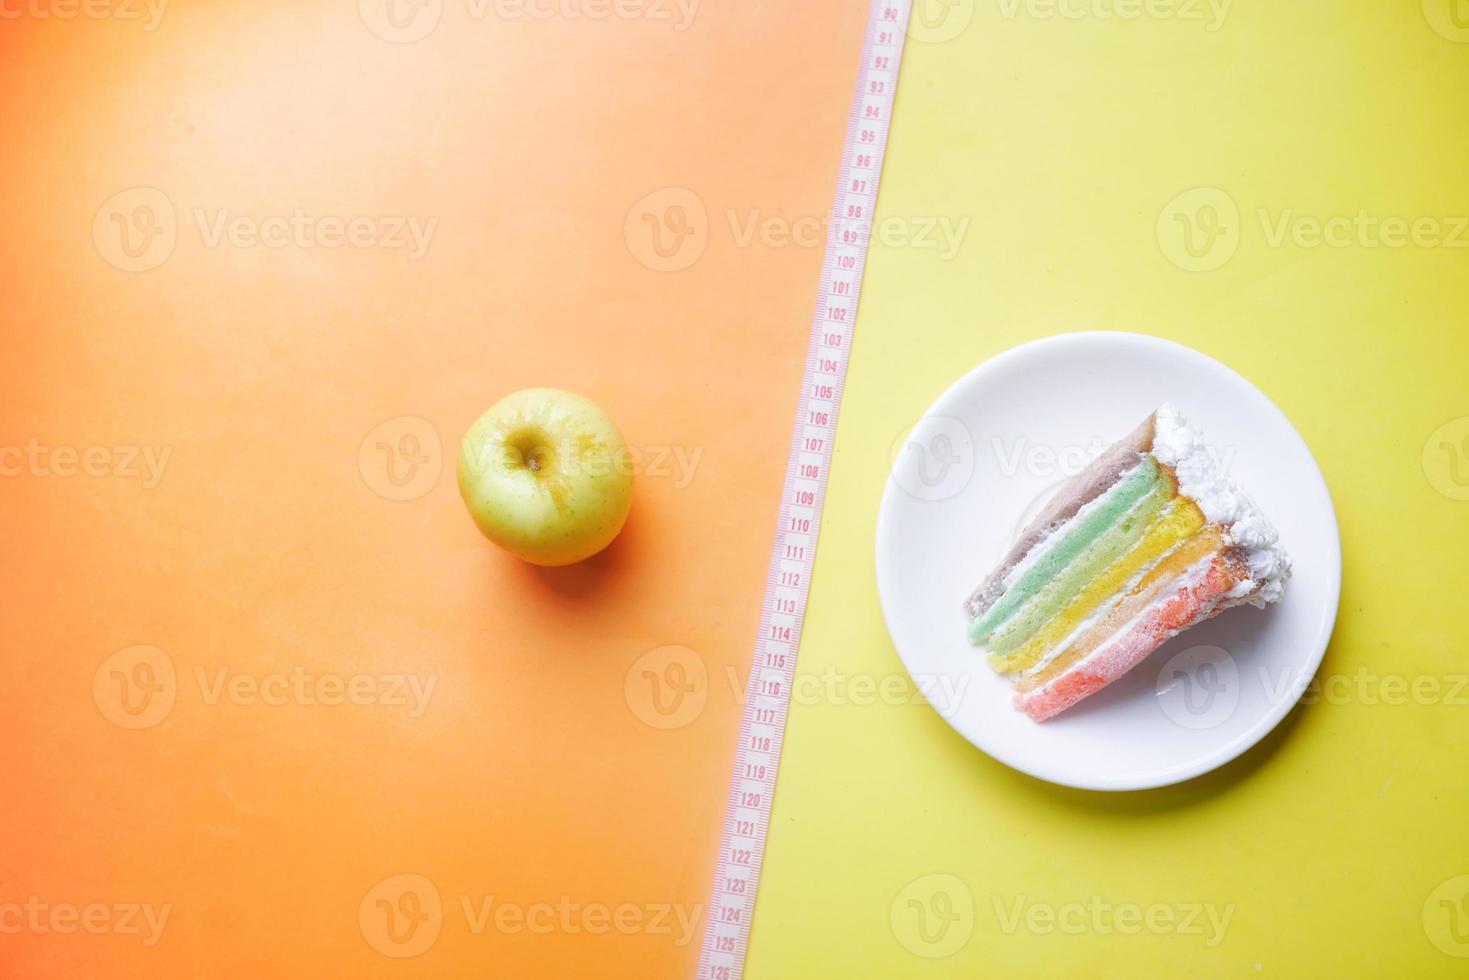 measuring tape, green apple and a bakery cake on color background photo